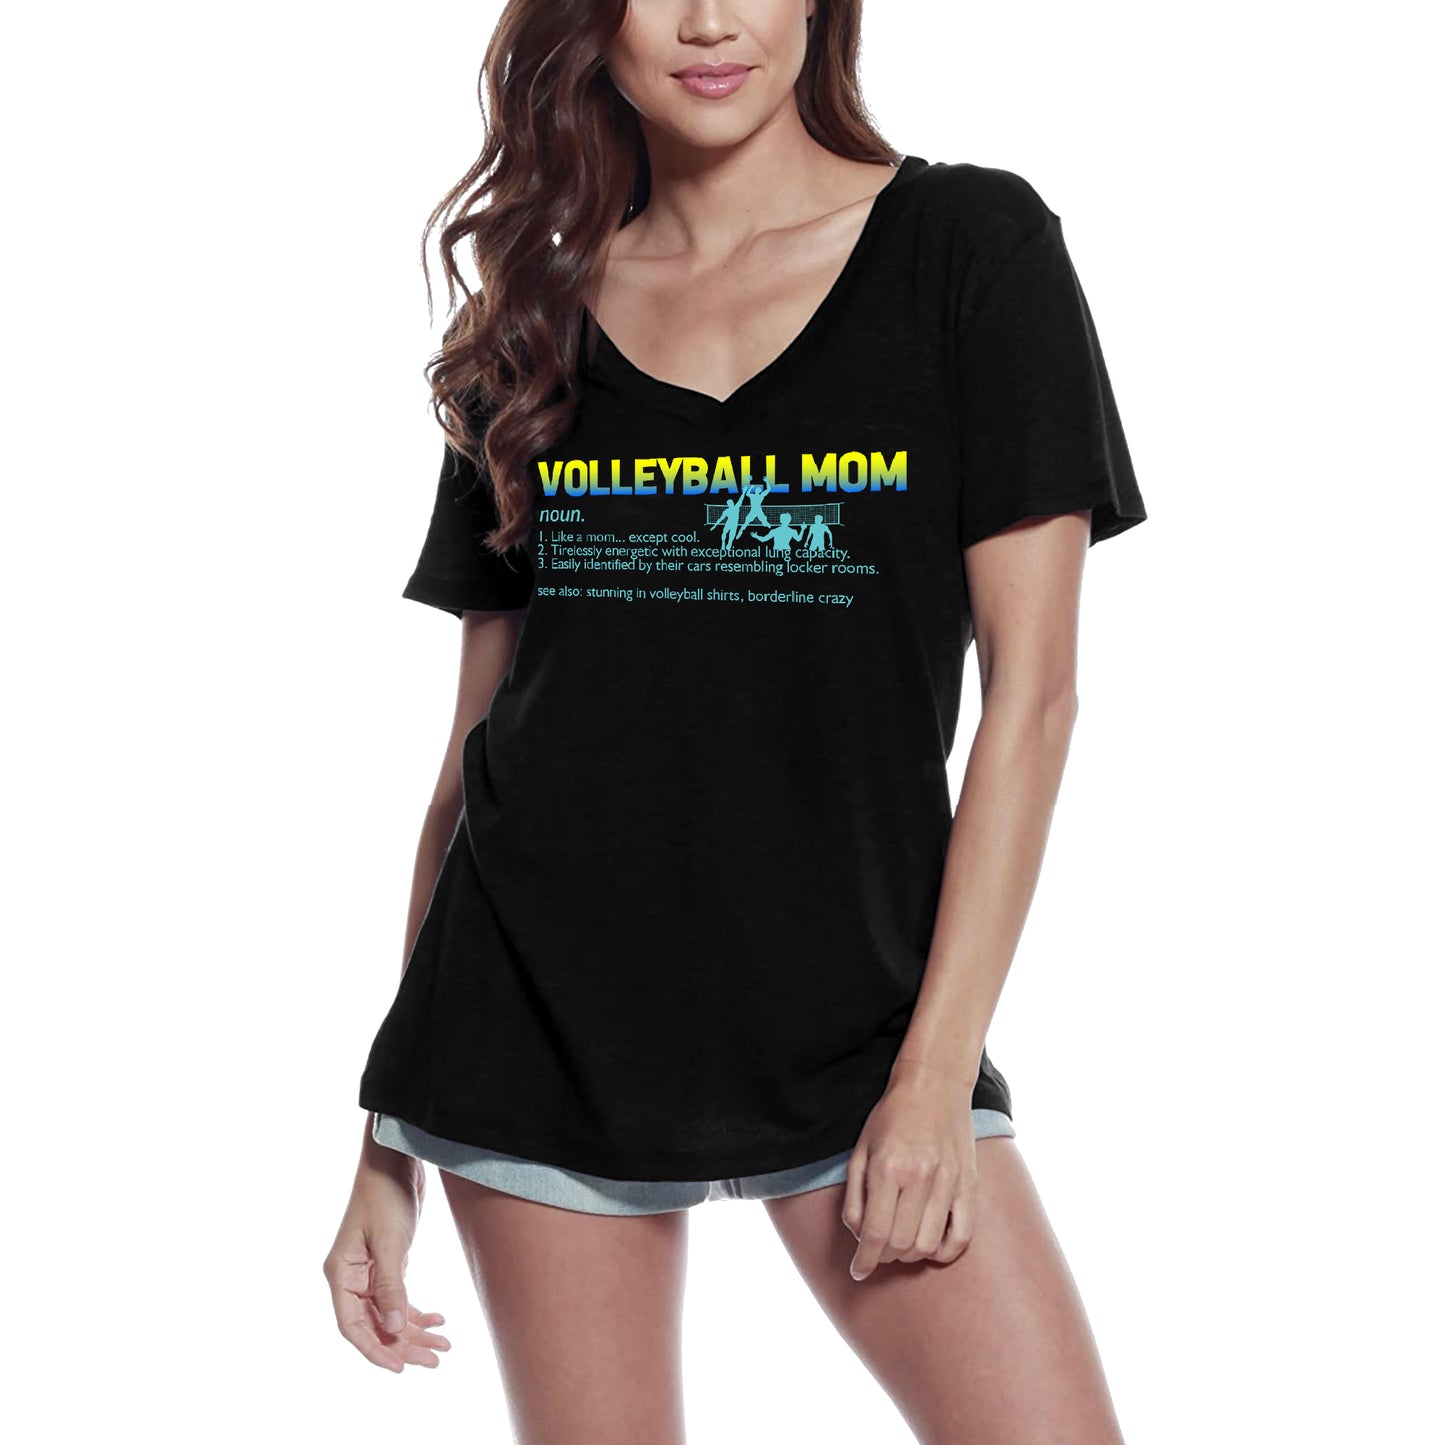 ULTRABASIC Women's V-Neck T-Shirt Definition of Volleyball Mom - Funny Quote